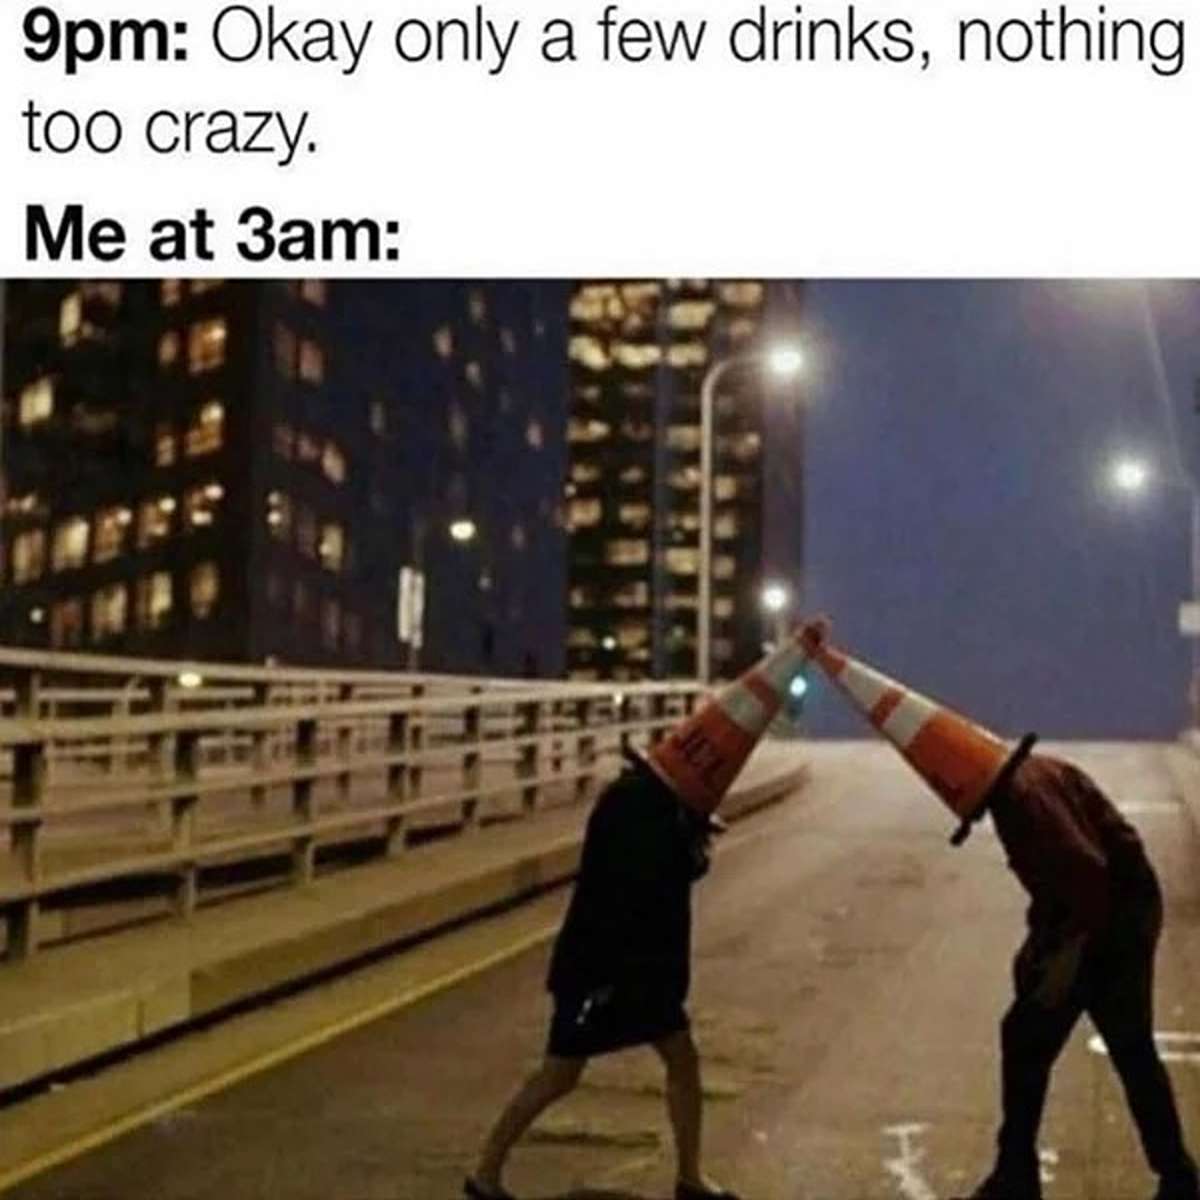 dank memes - funny drunk meme - 9pm Okay only a few drinks, nothing too crazy. Me at 3am